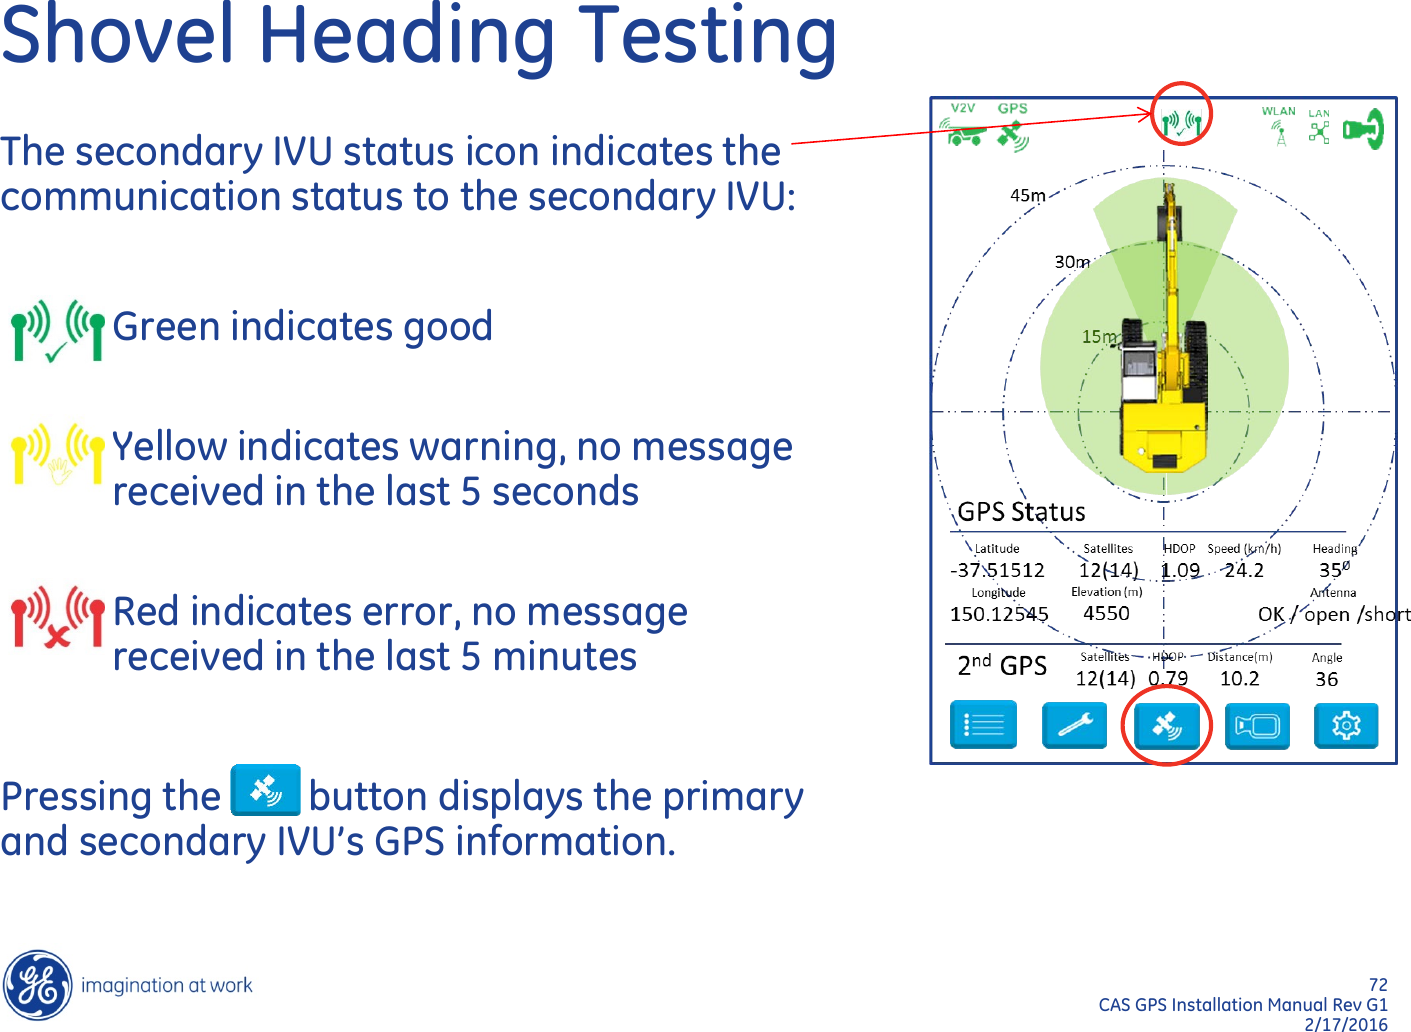 72  CAS GPS Installation Manual Rev G1 2/17/2016 Shovel Heading Testing The secondary IVU status icon indicates the communication status to the secondary IVU:  •Green indicates good  •Yellow indicates warning, no message received in the last 5 seconds  •Red indicates error, no message received in the last 5 minutes  Pressing the         button displays the primary and secondary IVU’s GPS information. 